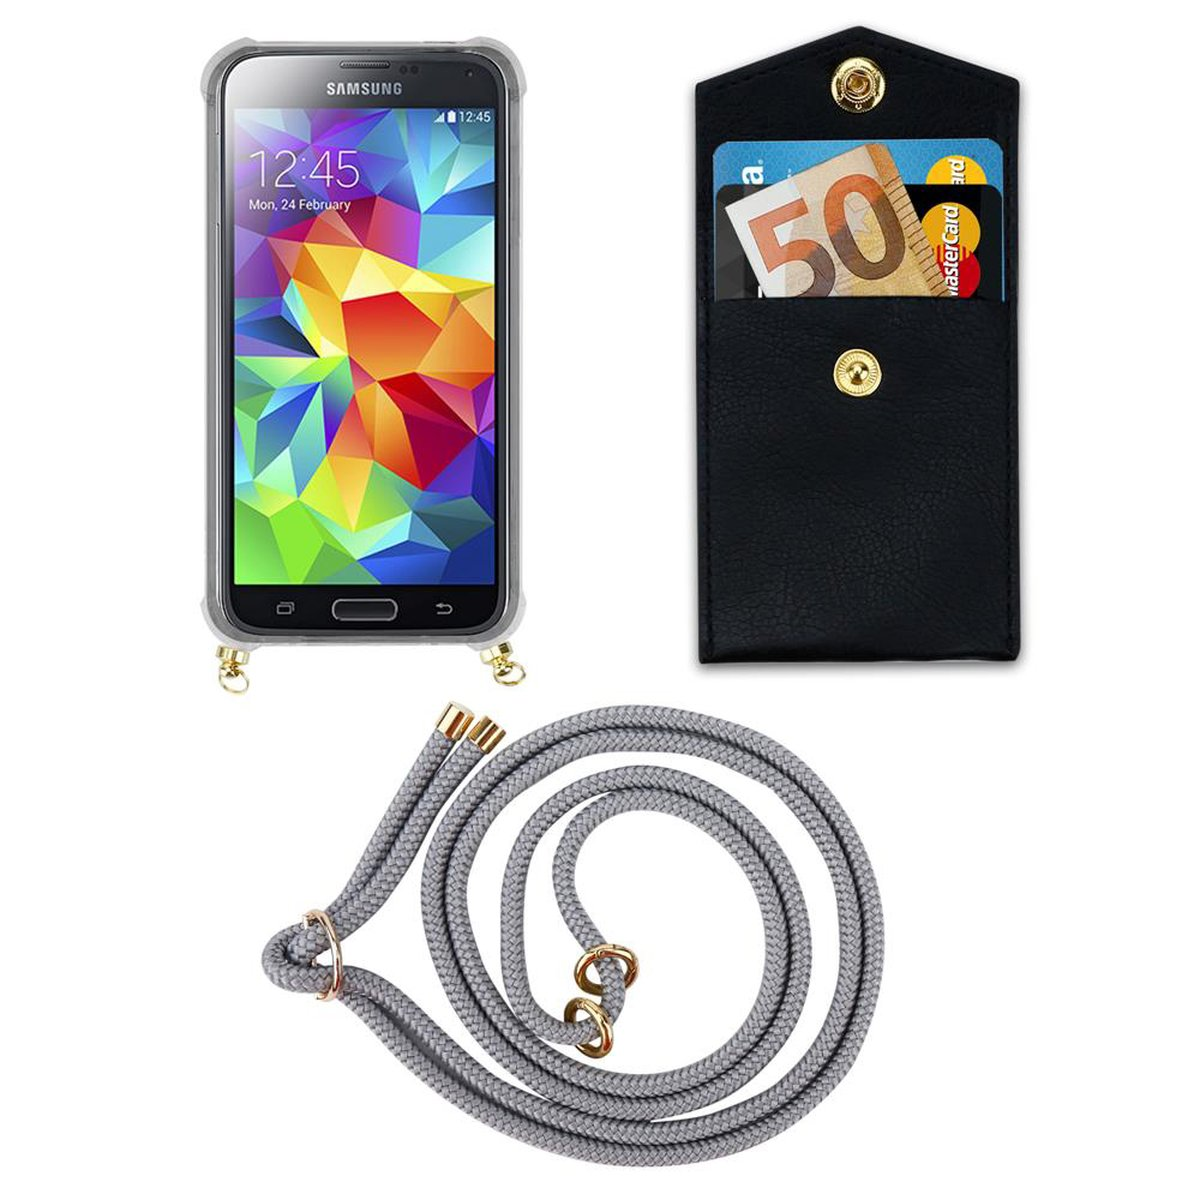 Handy S5 mit Samsung, Kette Gold Kordel Hülle, GRAU S5 Galaxy abnehmbarer Ringen, Band SILBER CADORABO und / Backcover, NEO,